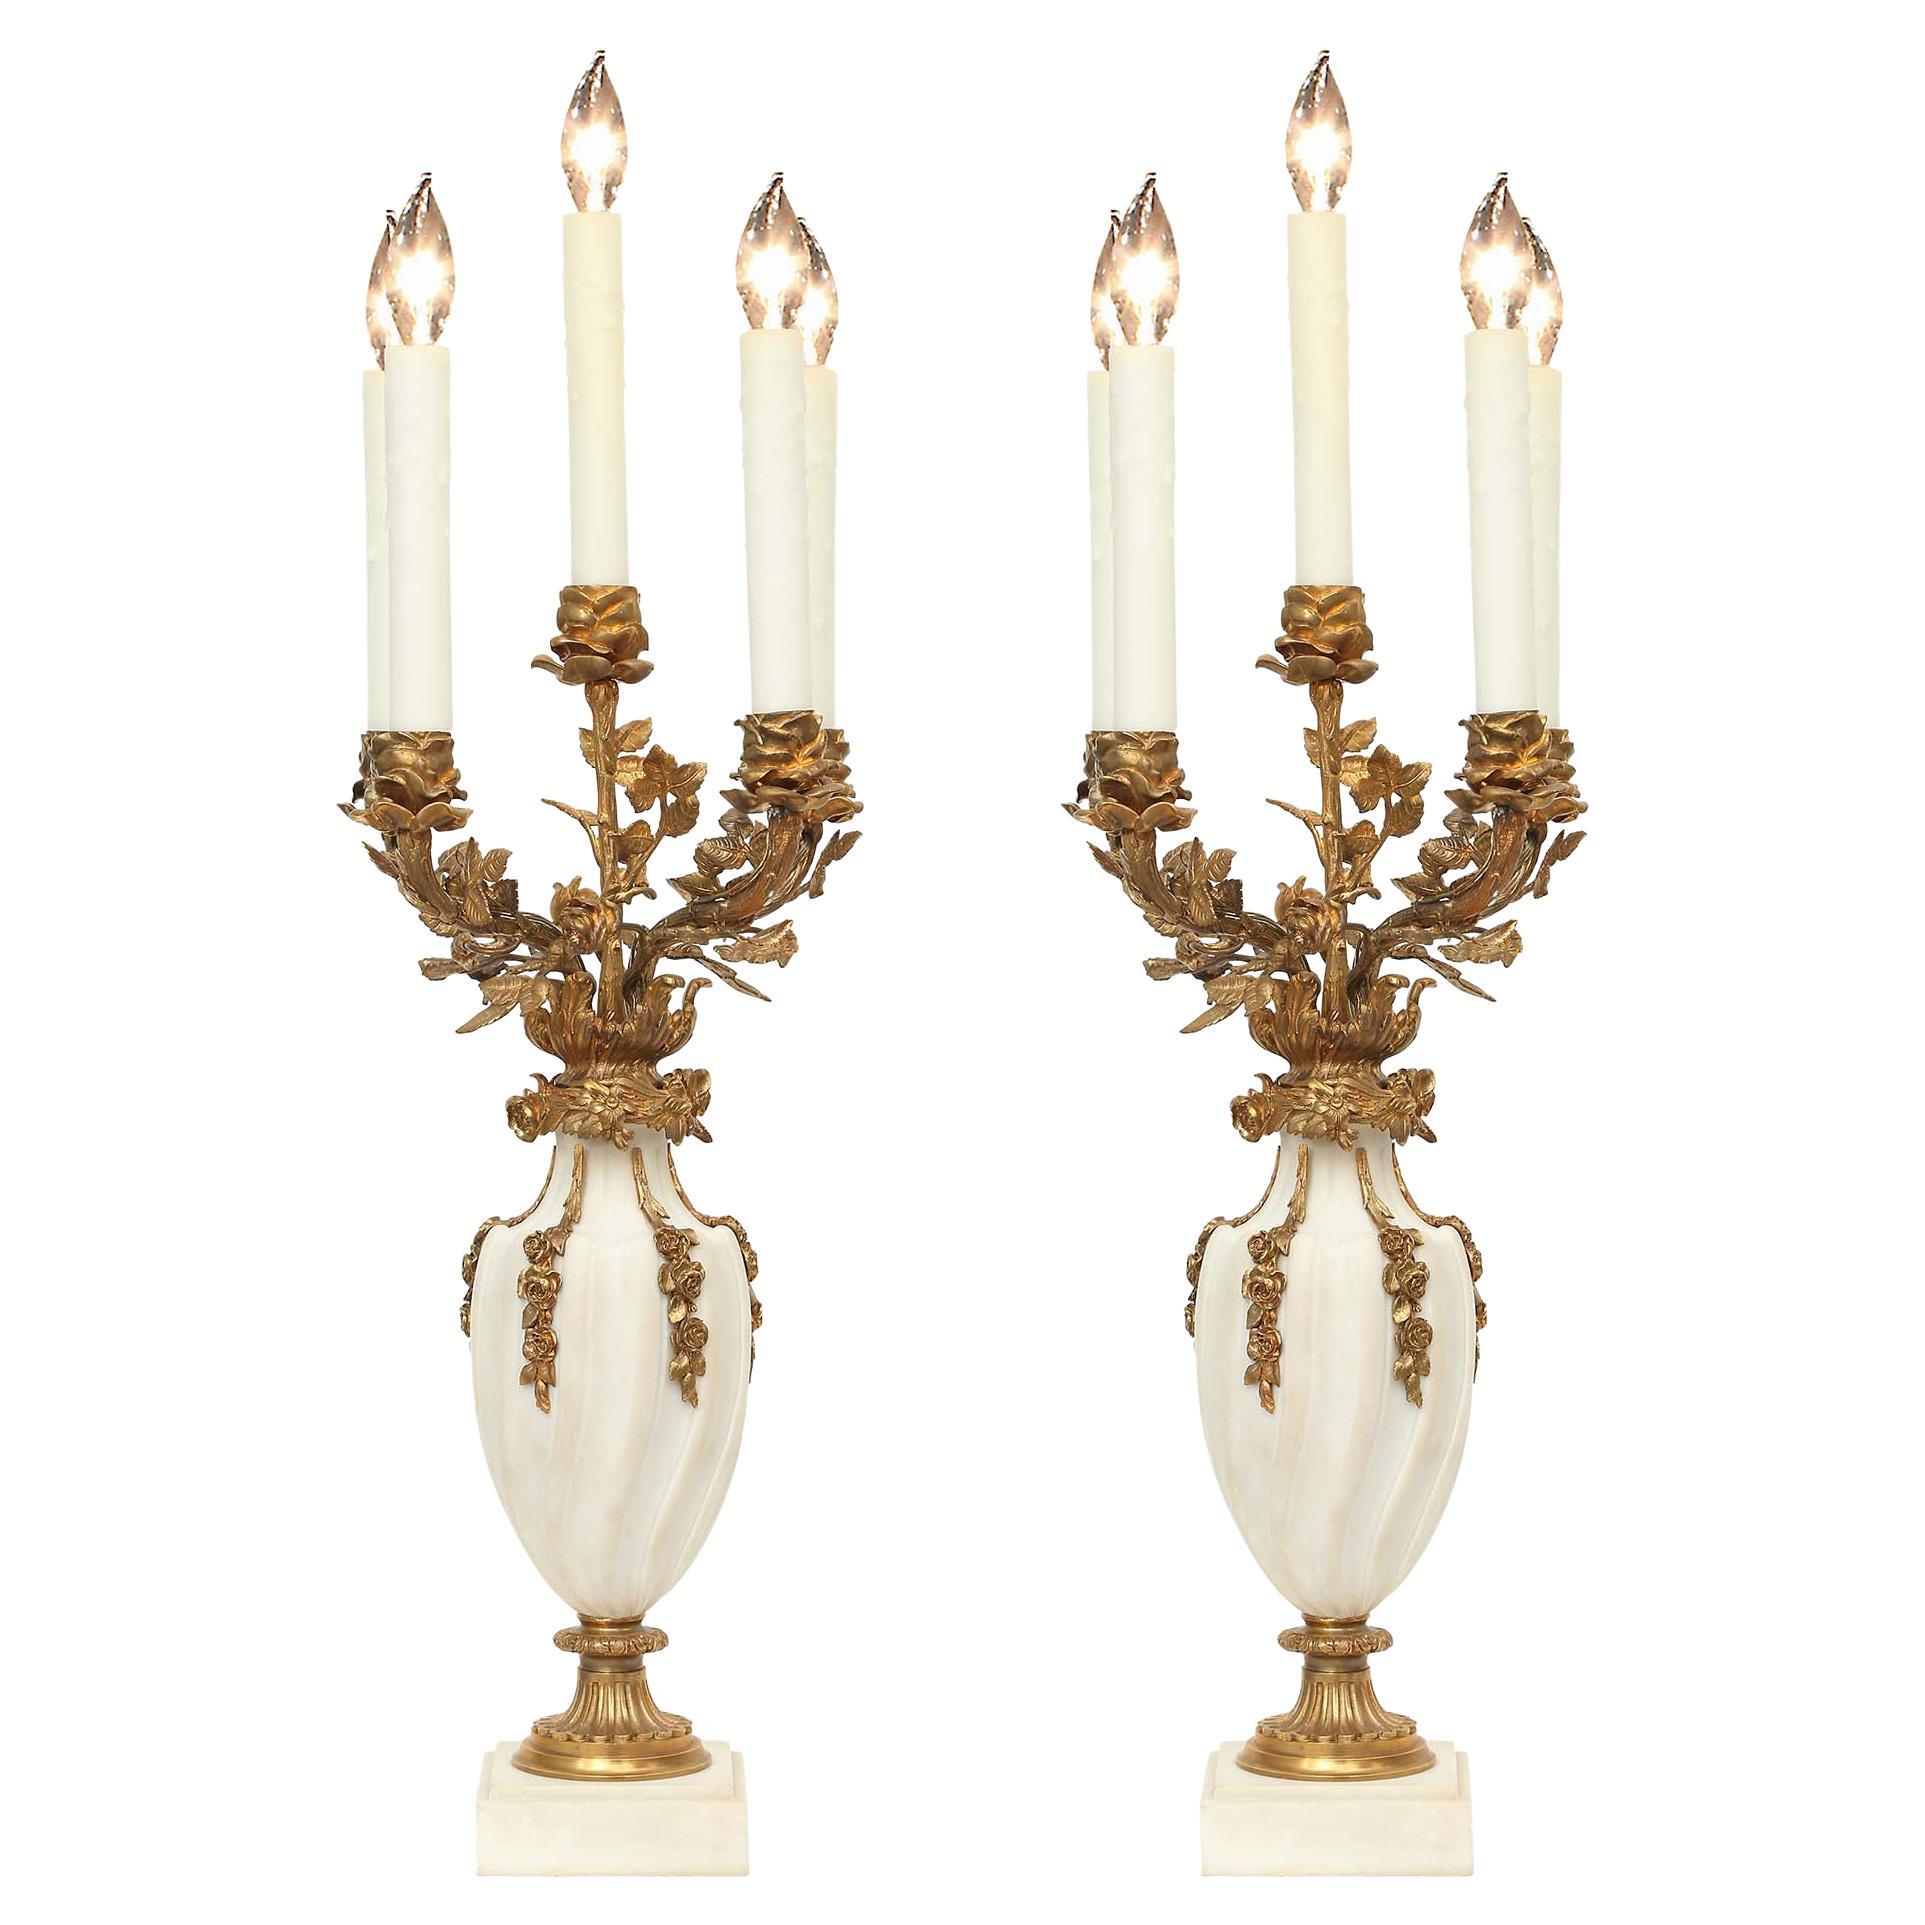 Pair of French Louis XVI Style Candelabras Mounted into Lamps For Sale